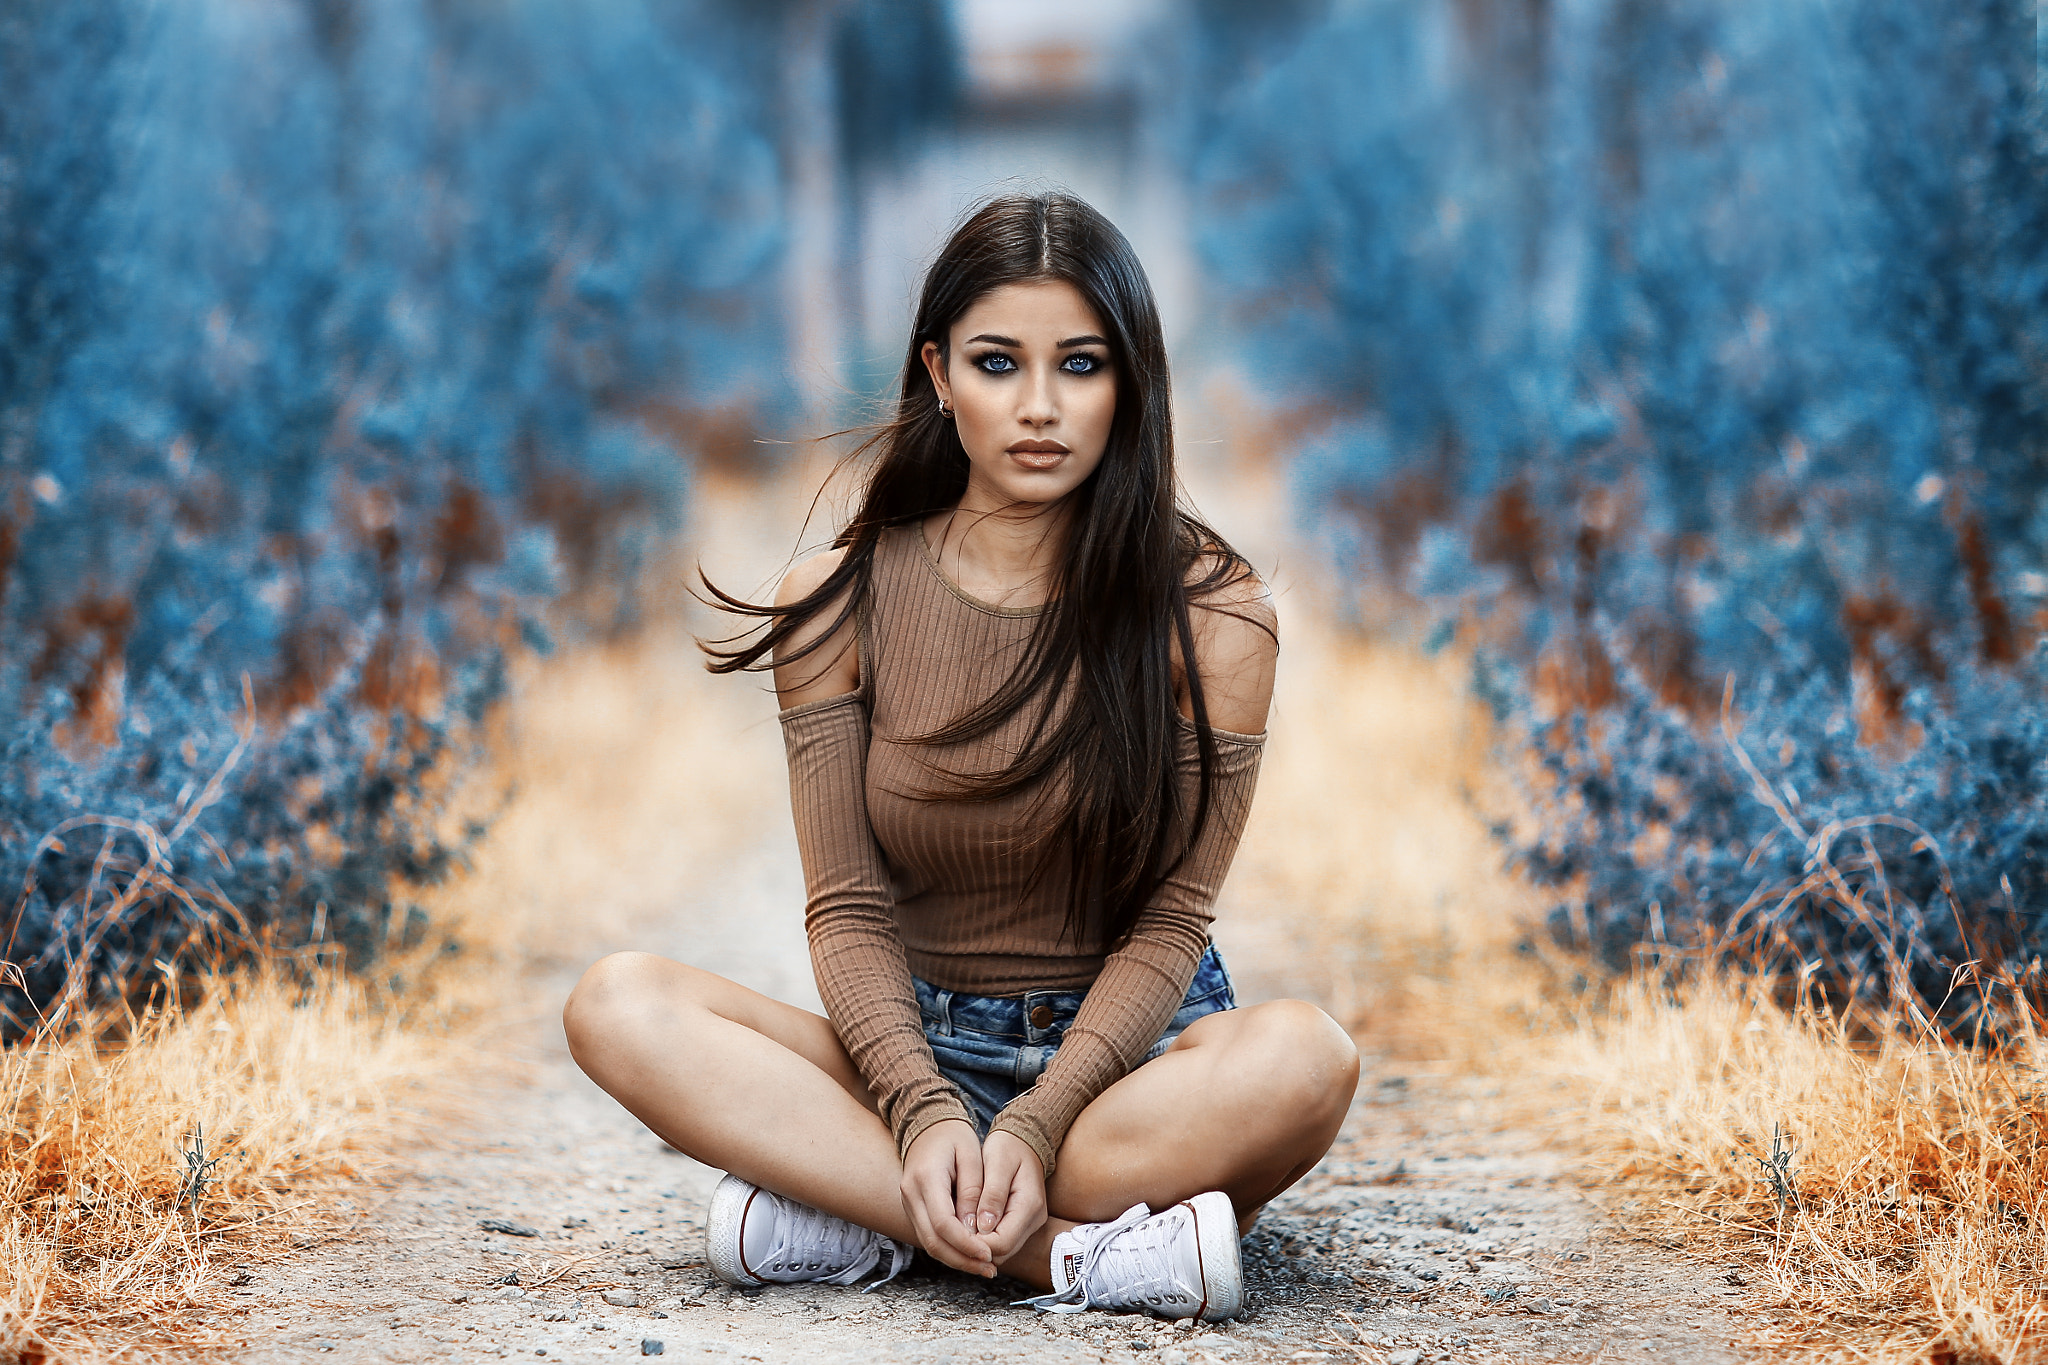 Women Tanned Sitting Sneakers Blue Eyes Legs Crossed Depth Of Field Alessandro Di Cicco 2048x1365